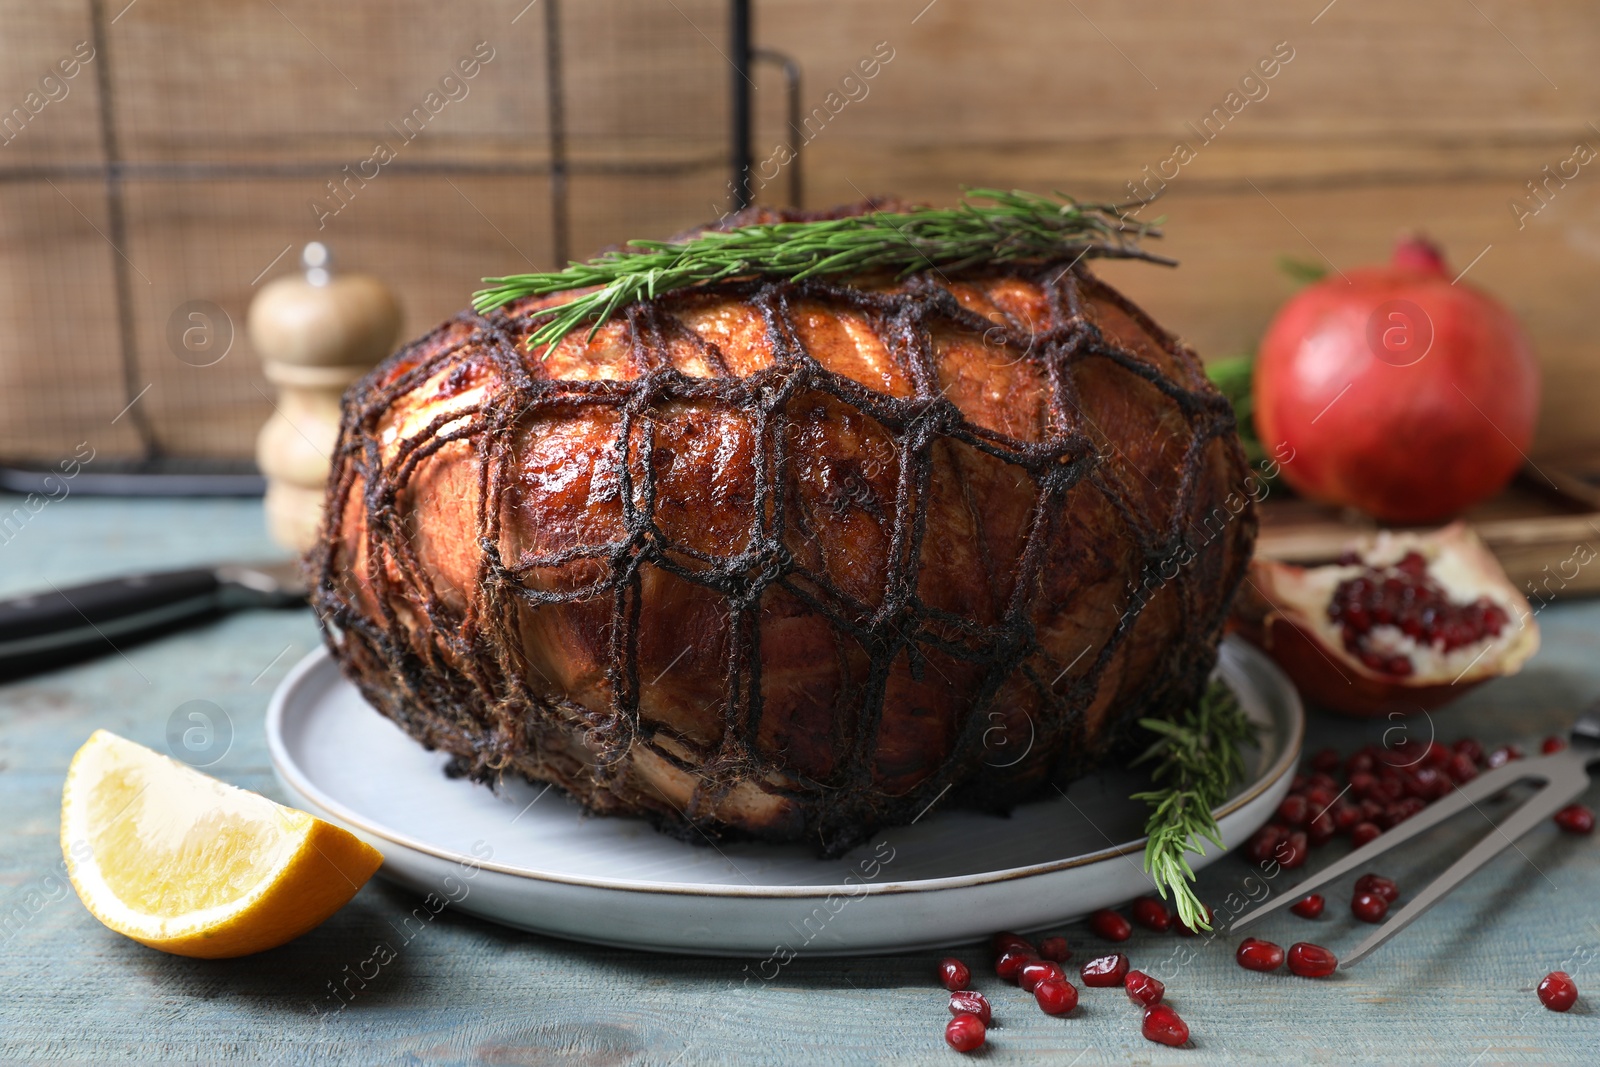 Photo of Delicious baked ham, carving fork, orange slice, pomegranate seeds and rosemary on rustic wooden table